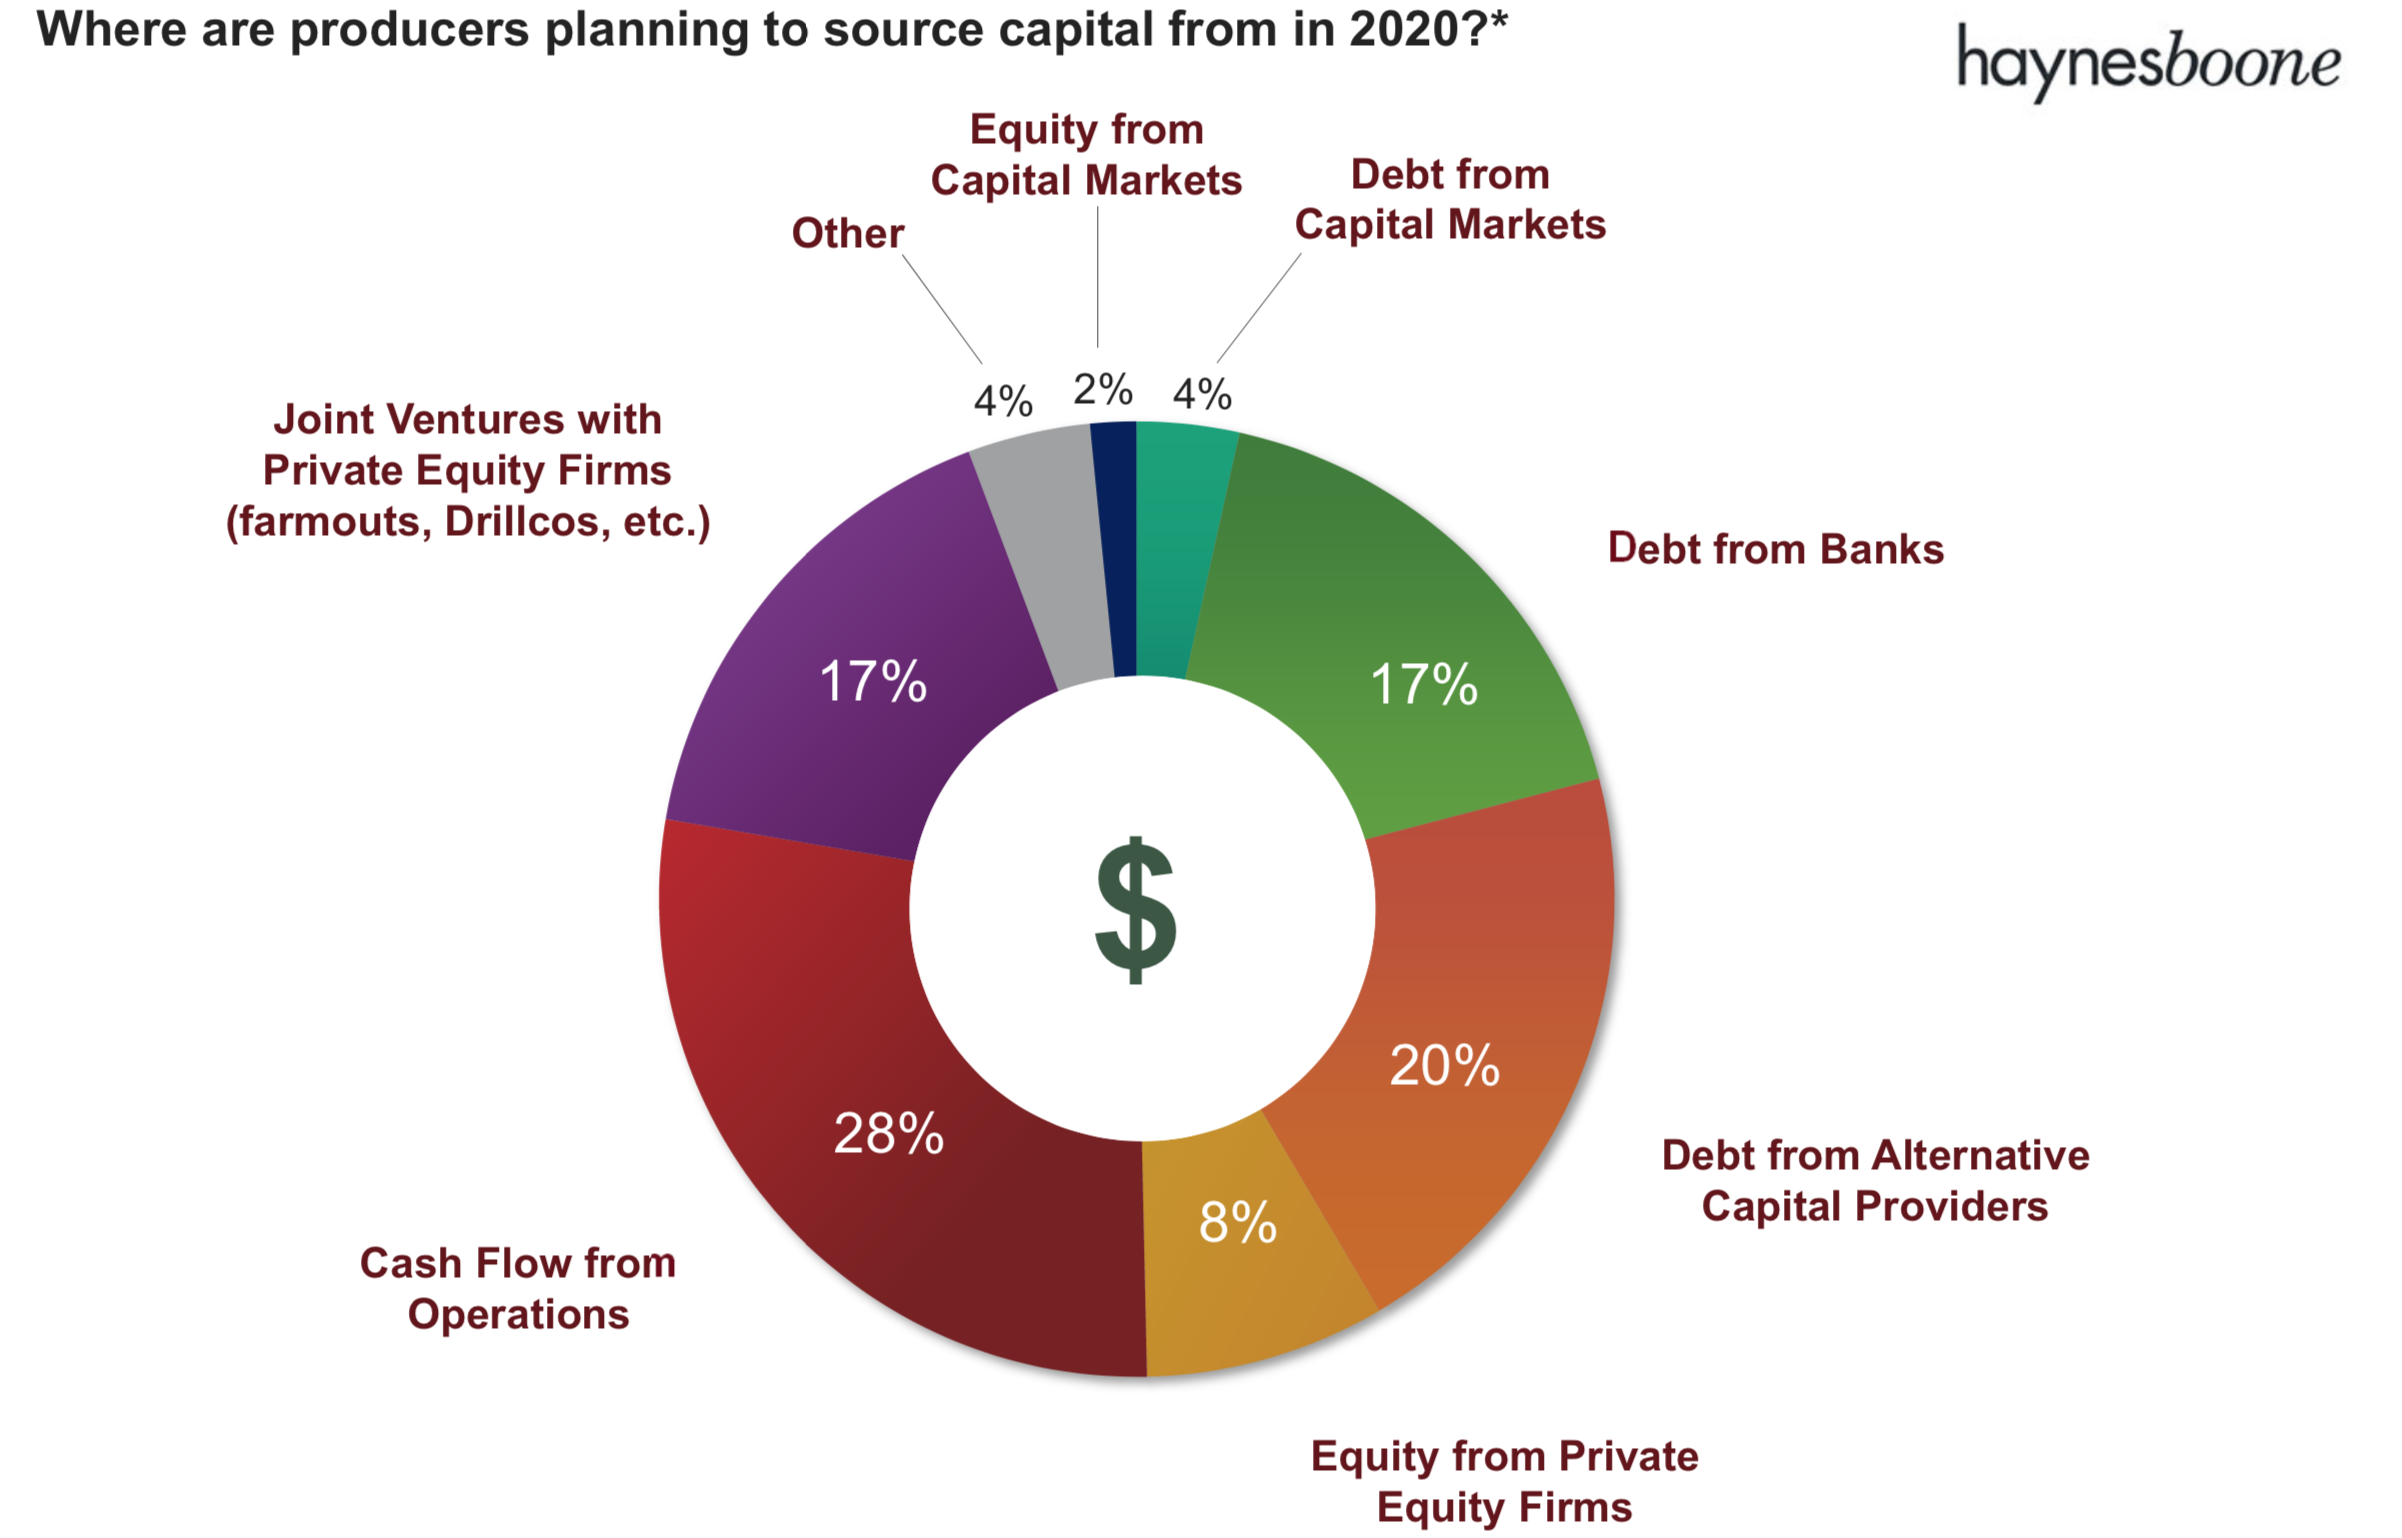 Where are producers planning to source capital from in 2020?